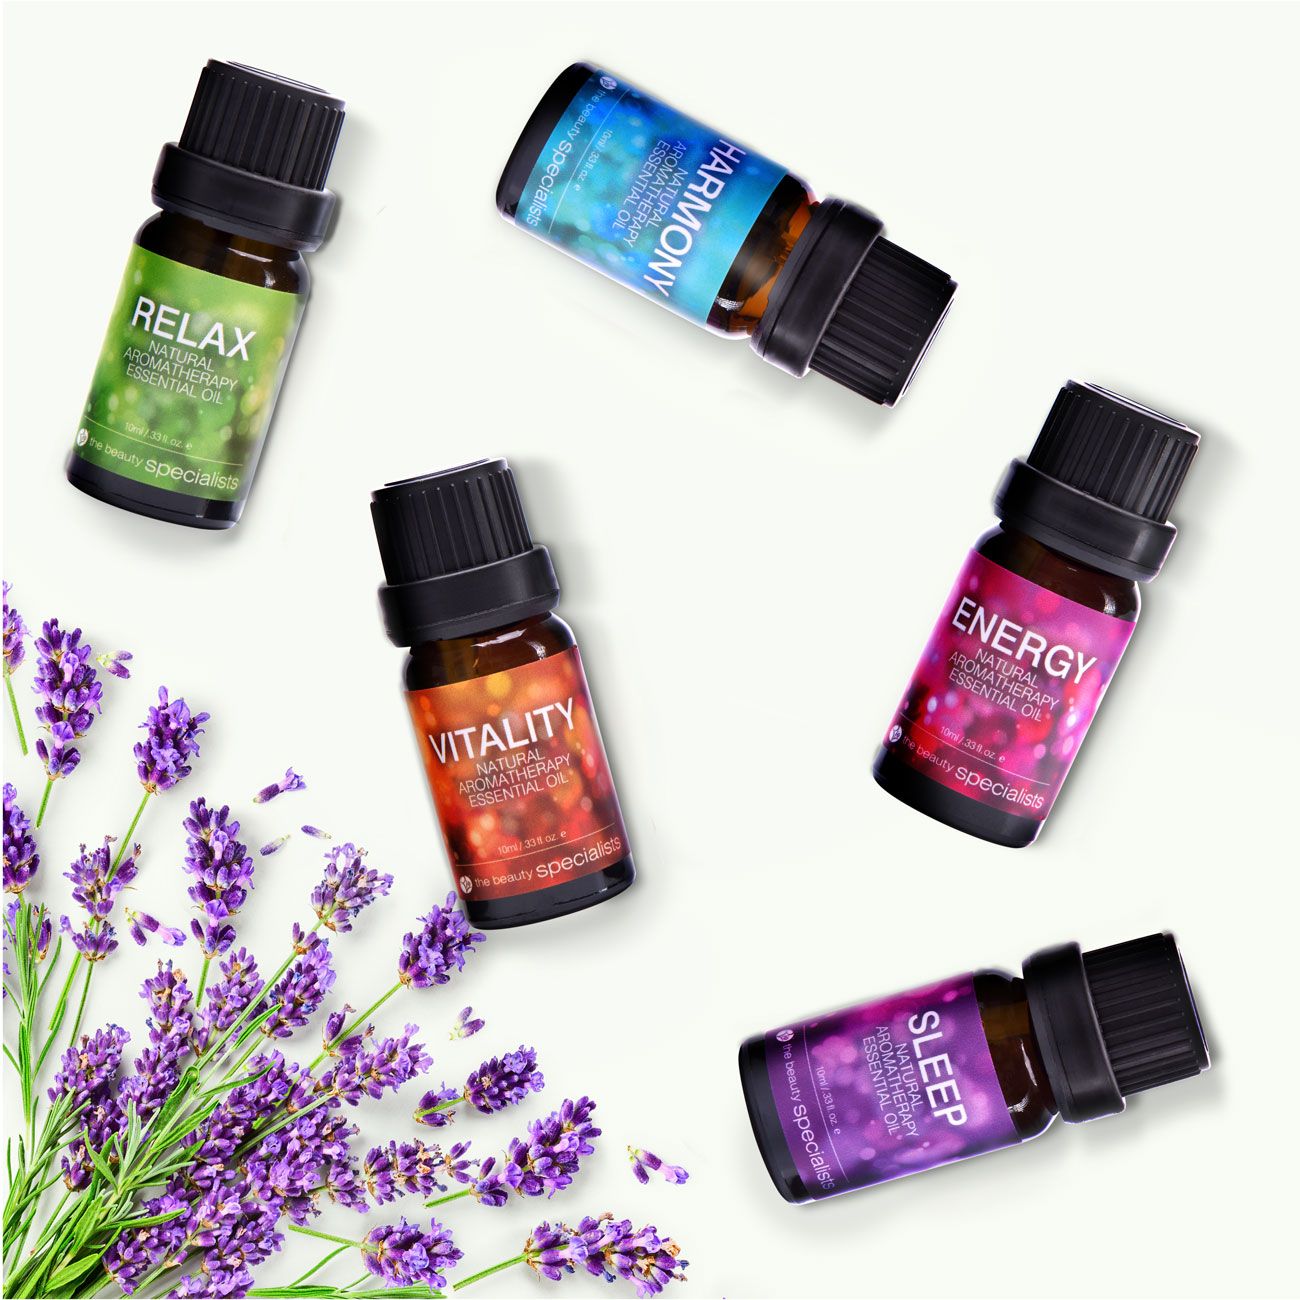 rio wellbeing collection aromatherapy oils 5 10ml bottles relax harmony vitality energy and sleep scattered on a white surface with decorative sprigs of lavender in bottom left corner